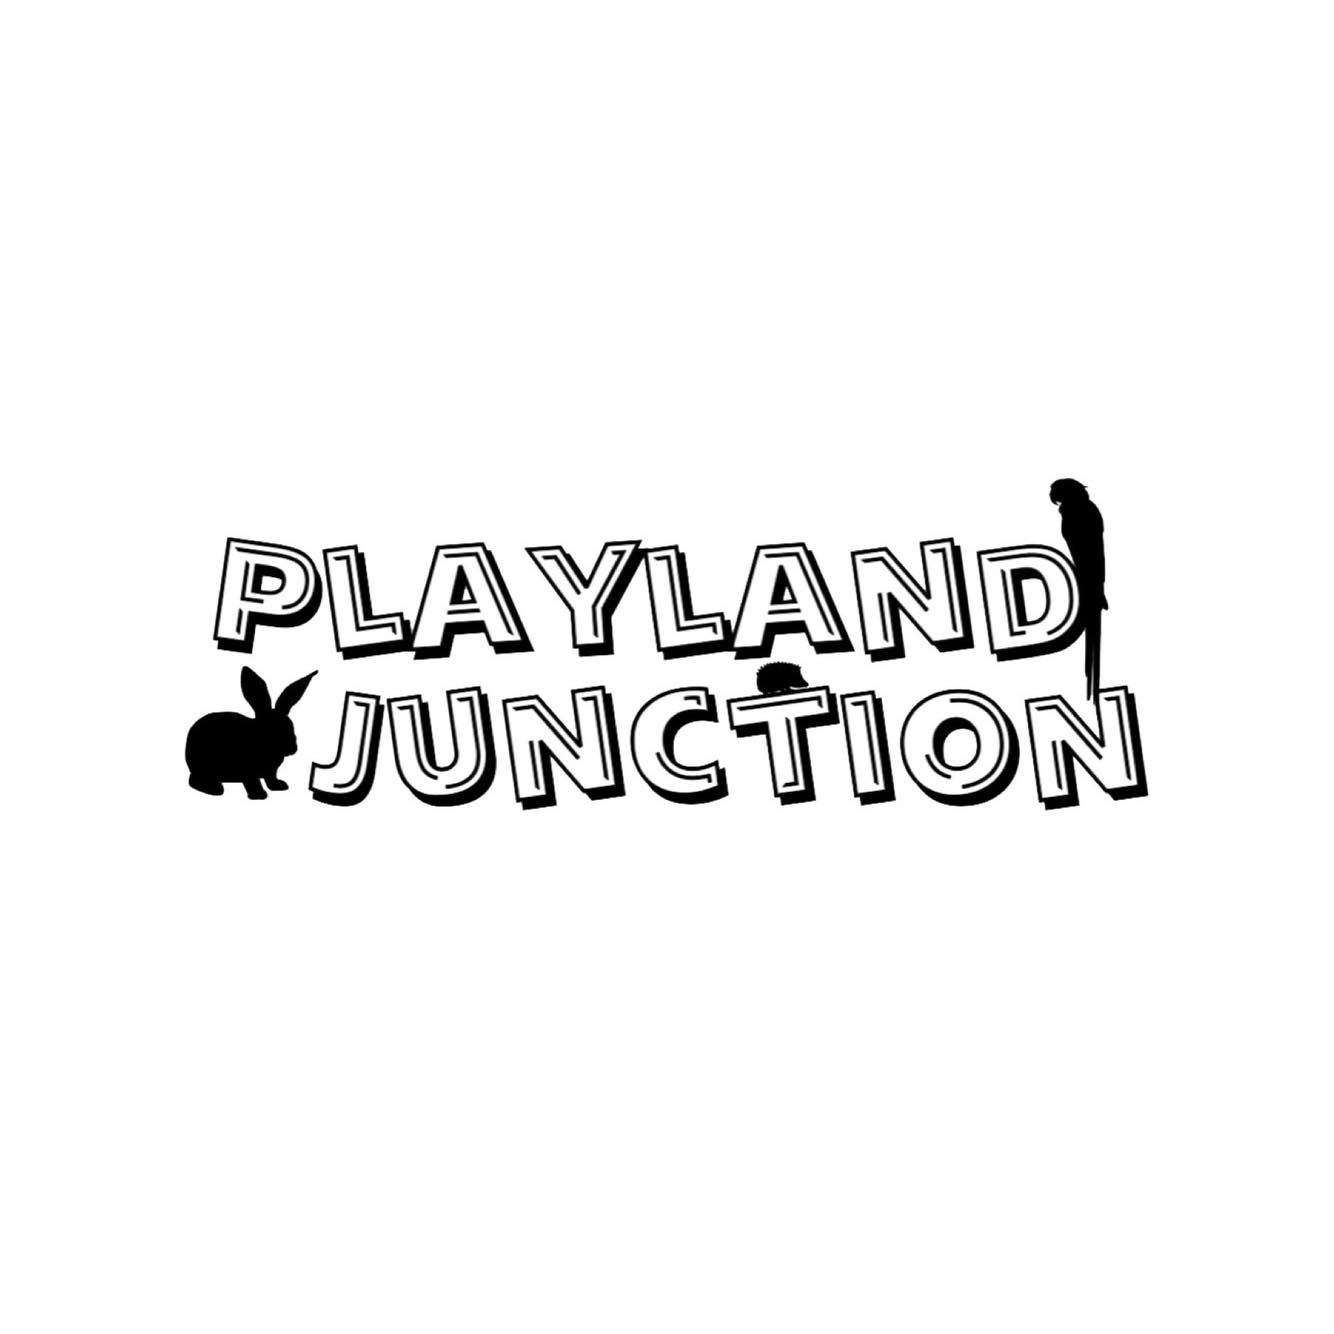 Playland Junction